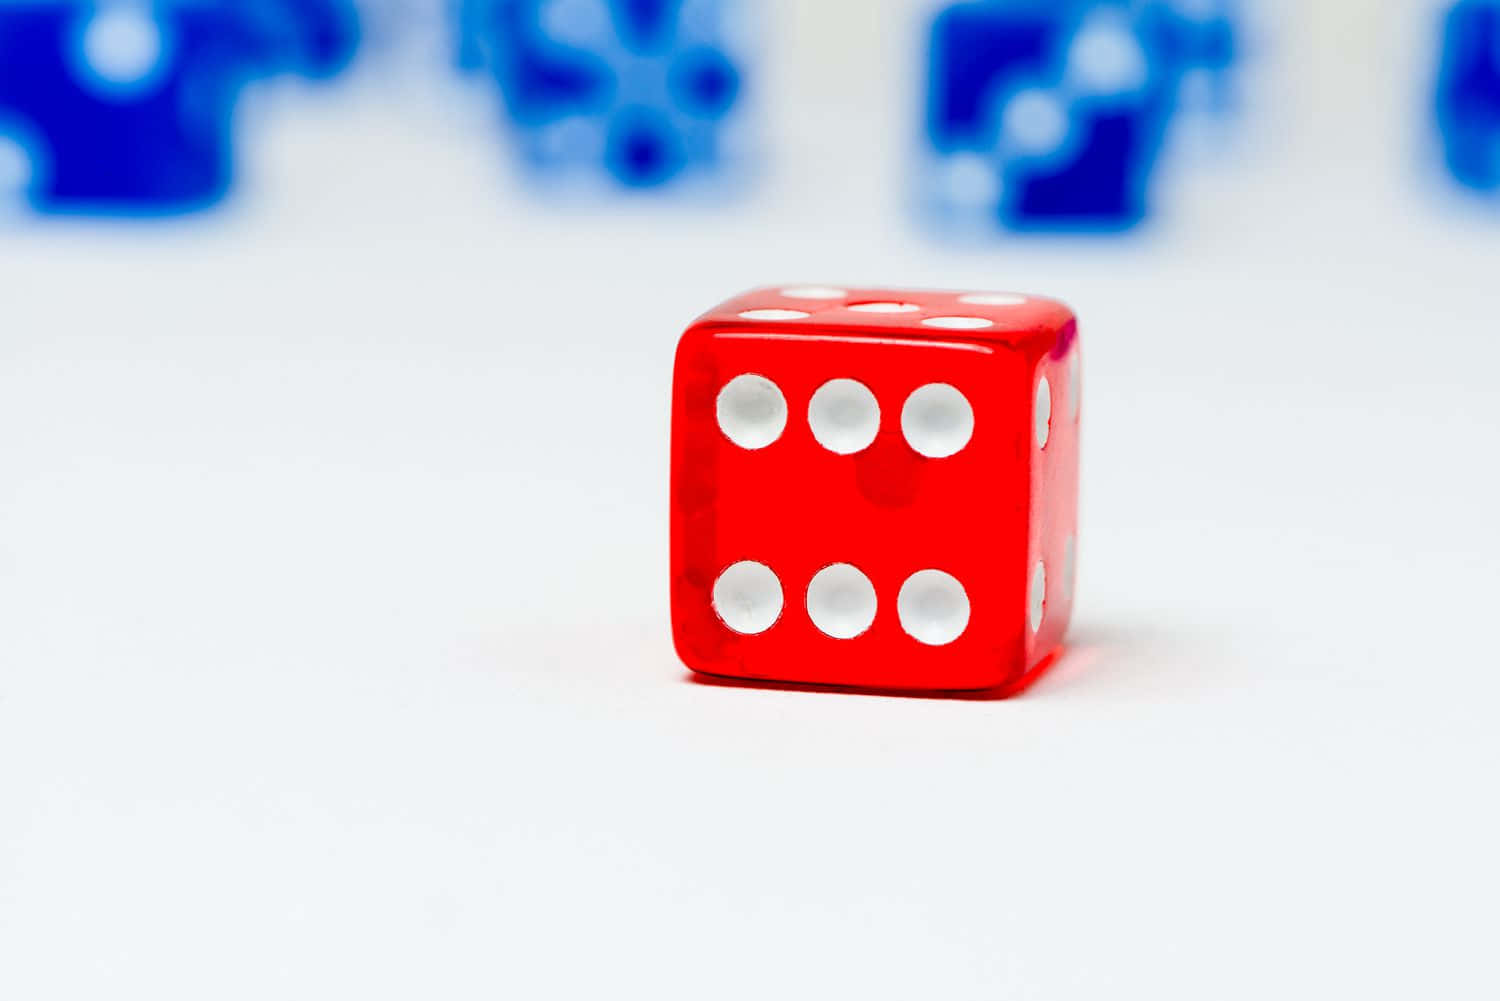 A Red And Blue Dice On A White Background